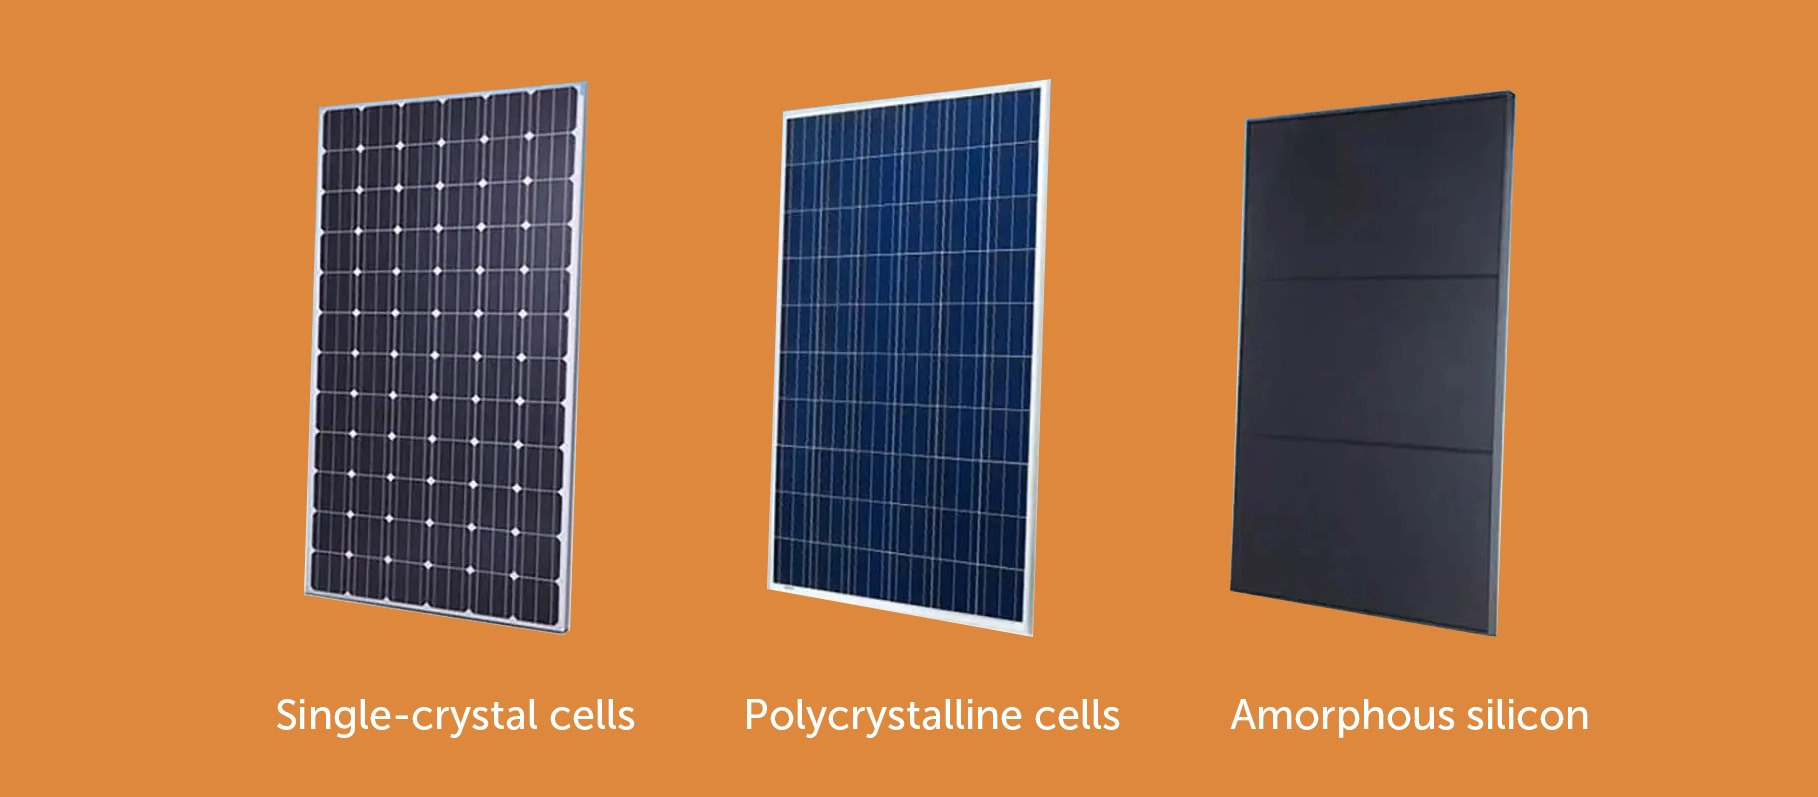 Photovoltaic cells are of three types